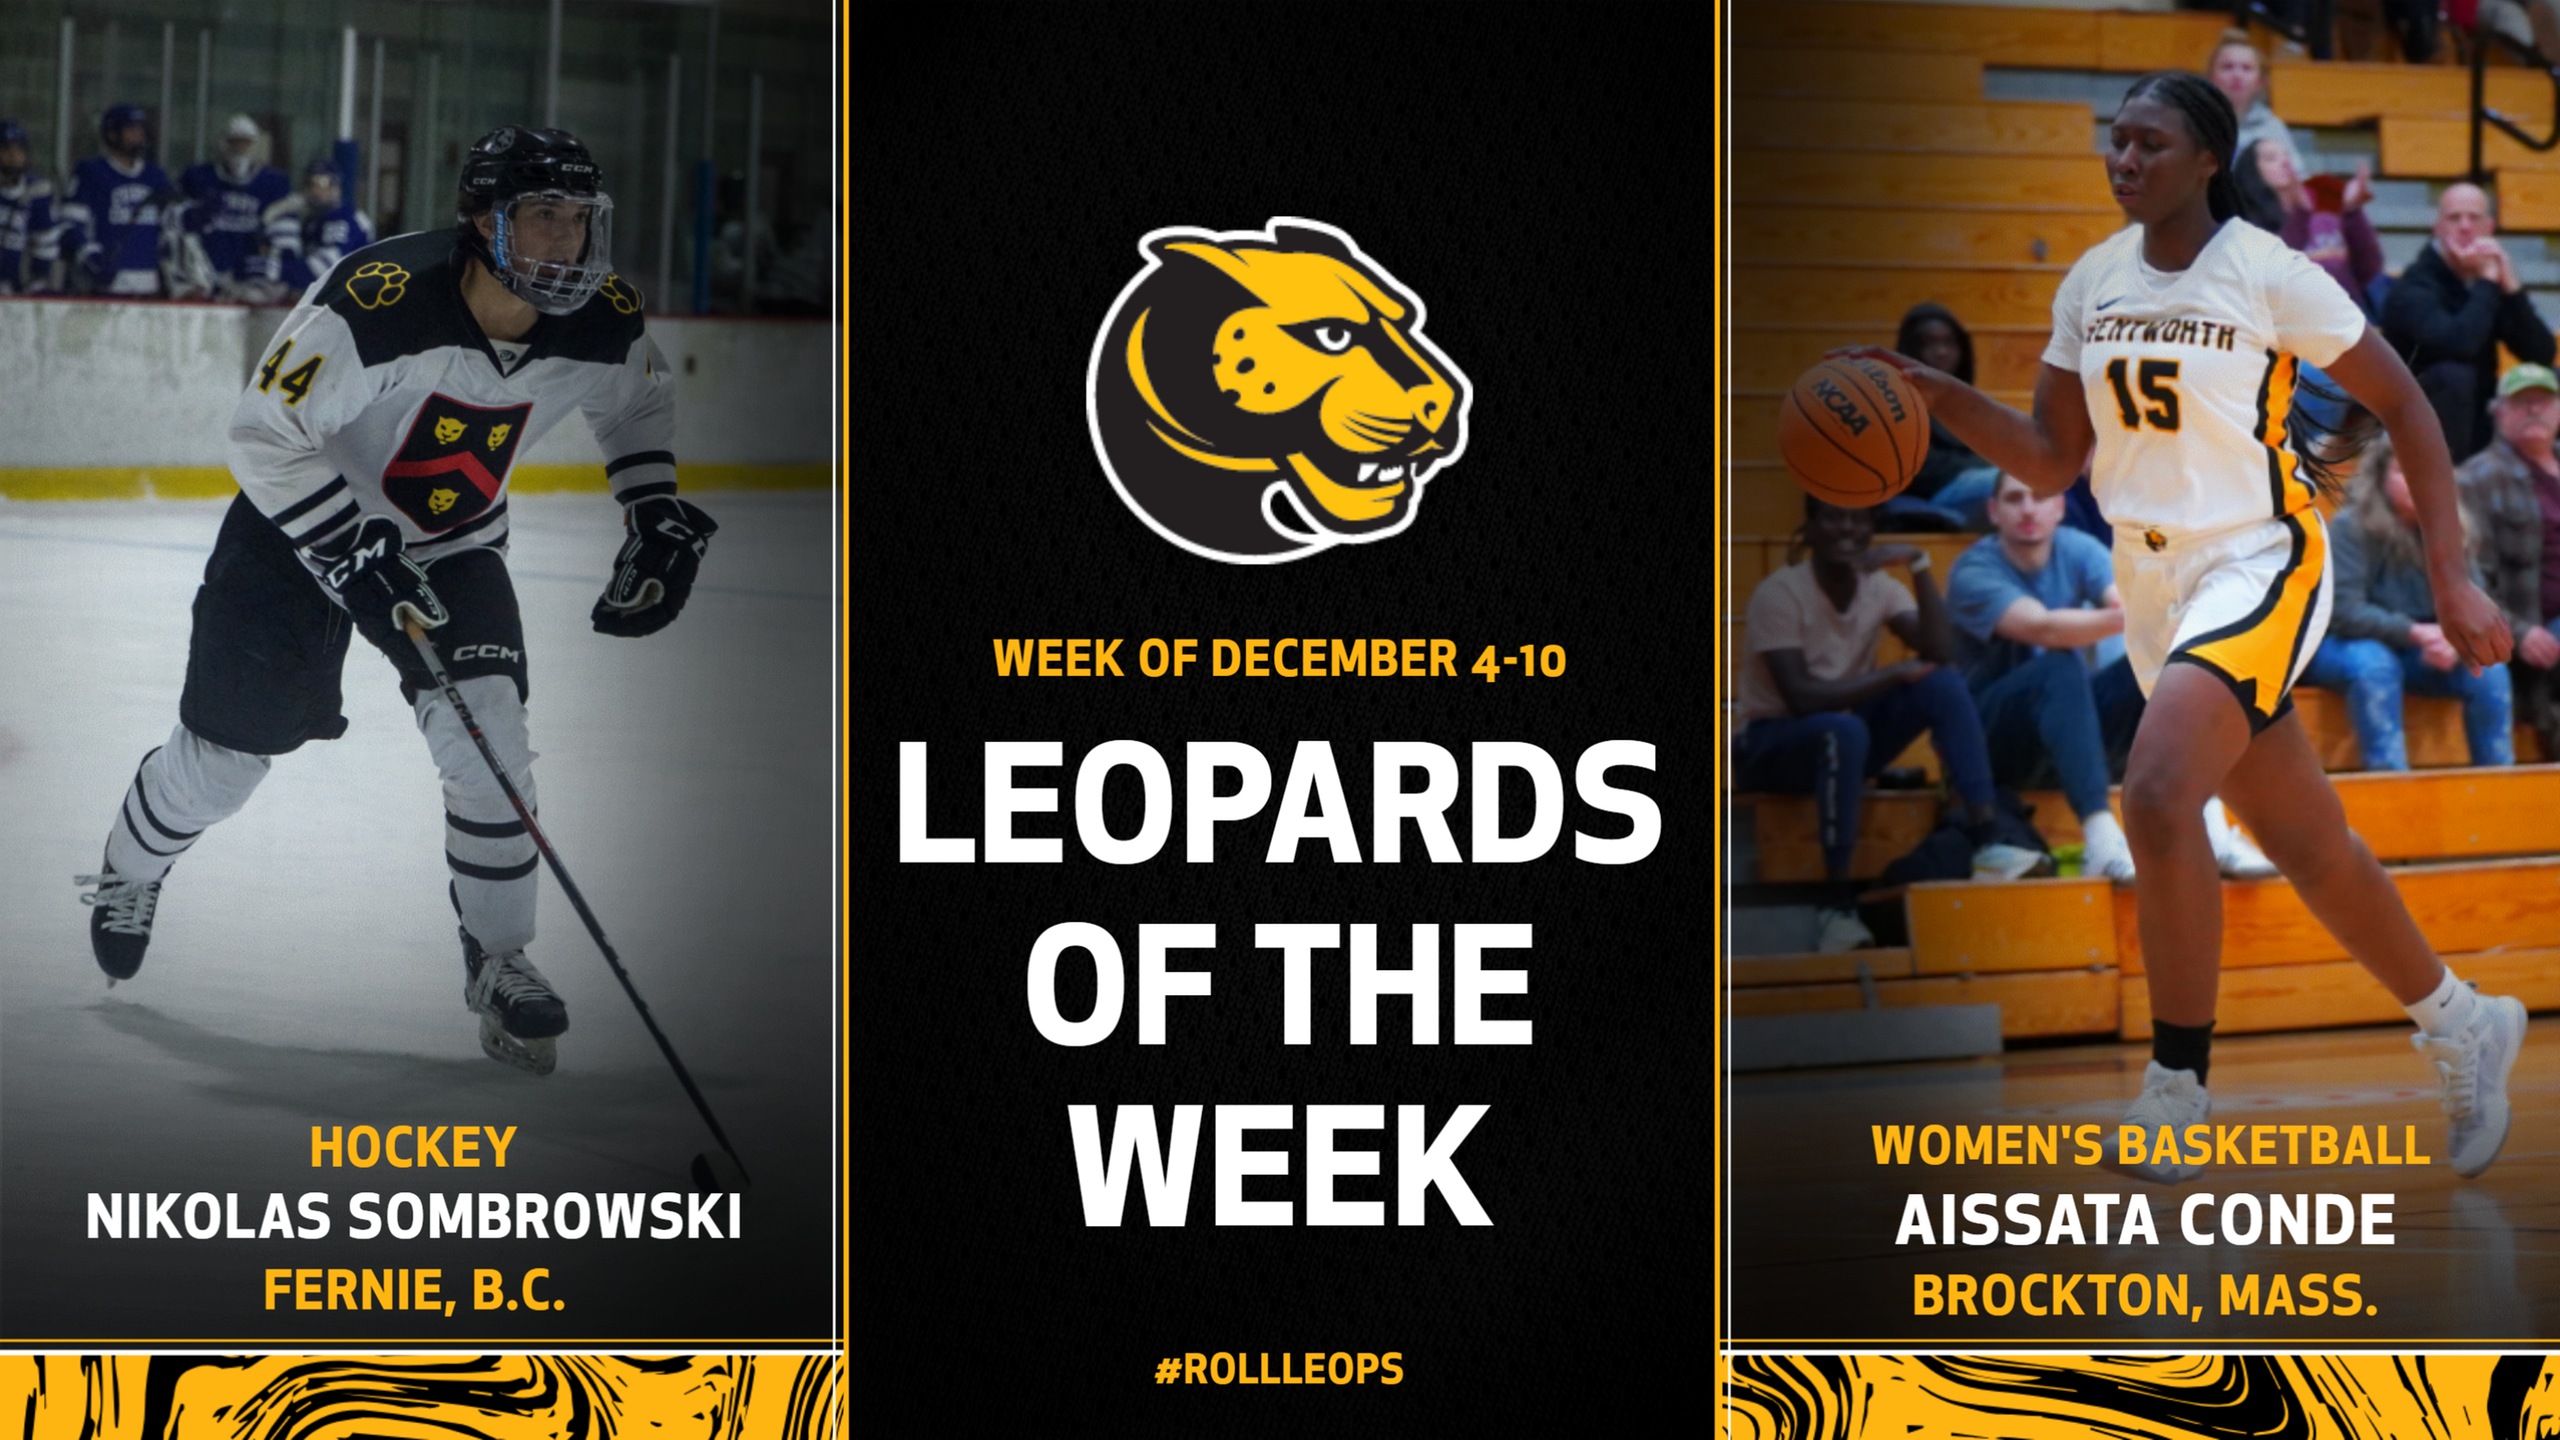 Sombrowski, Conde Named Leopards of the Week